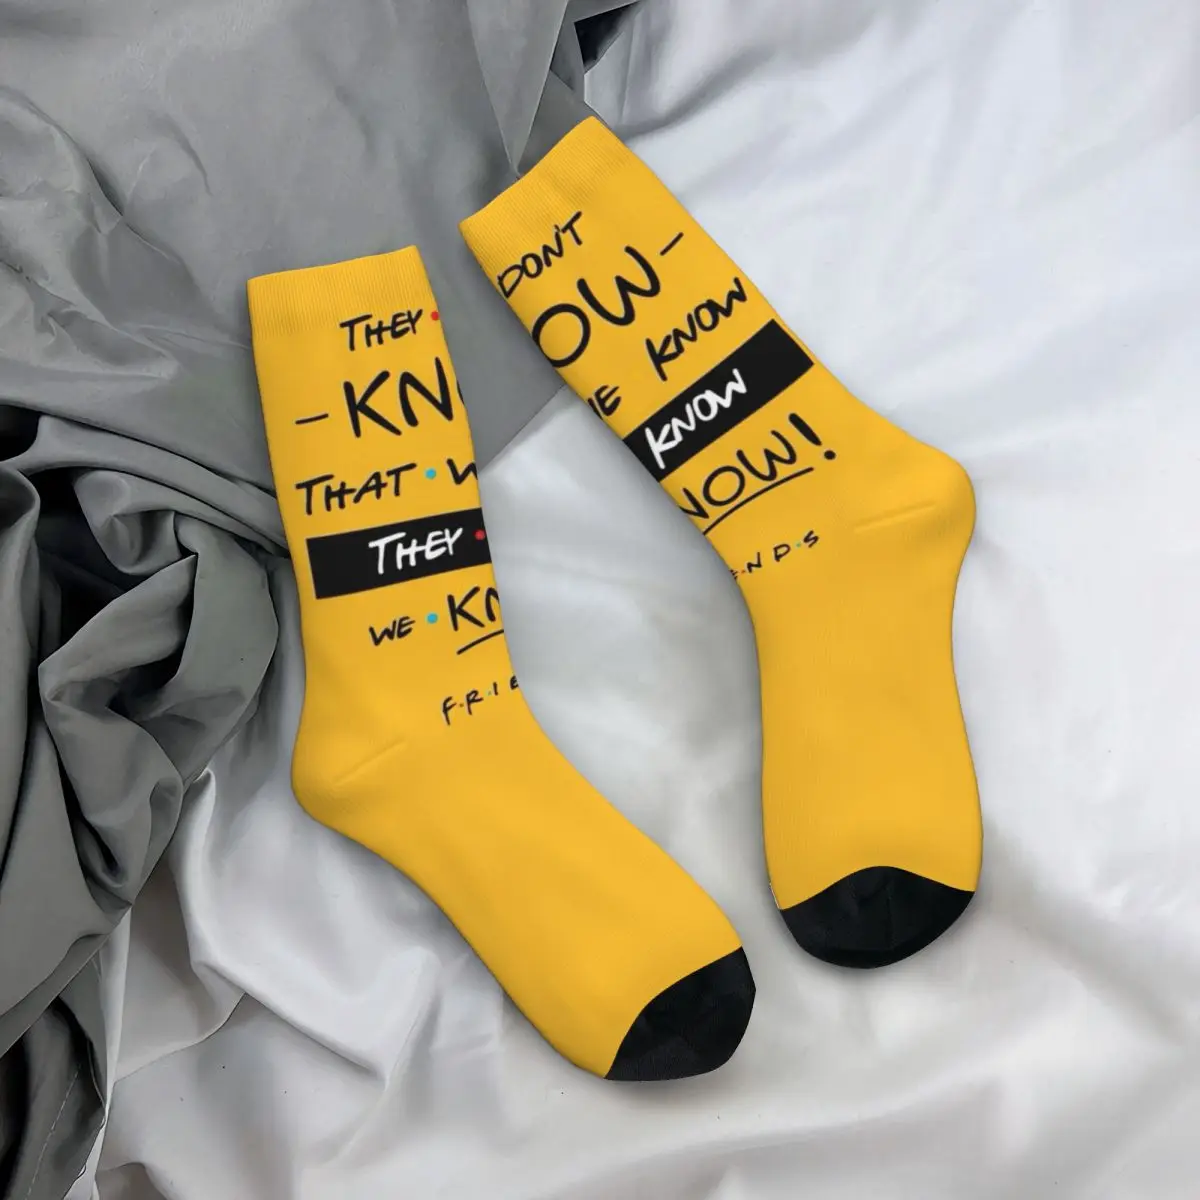 JOEY DOESN'T SHARE FOOD TV Show cosy Unisex Socks,Cycling Happy 3D printing Socks,Street Style Crazy Sock